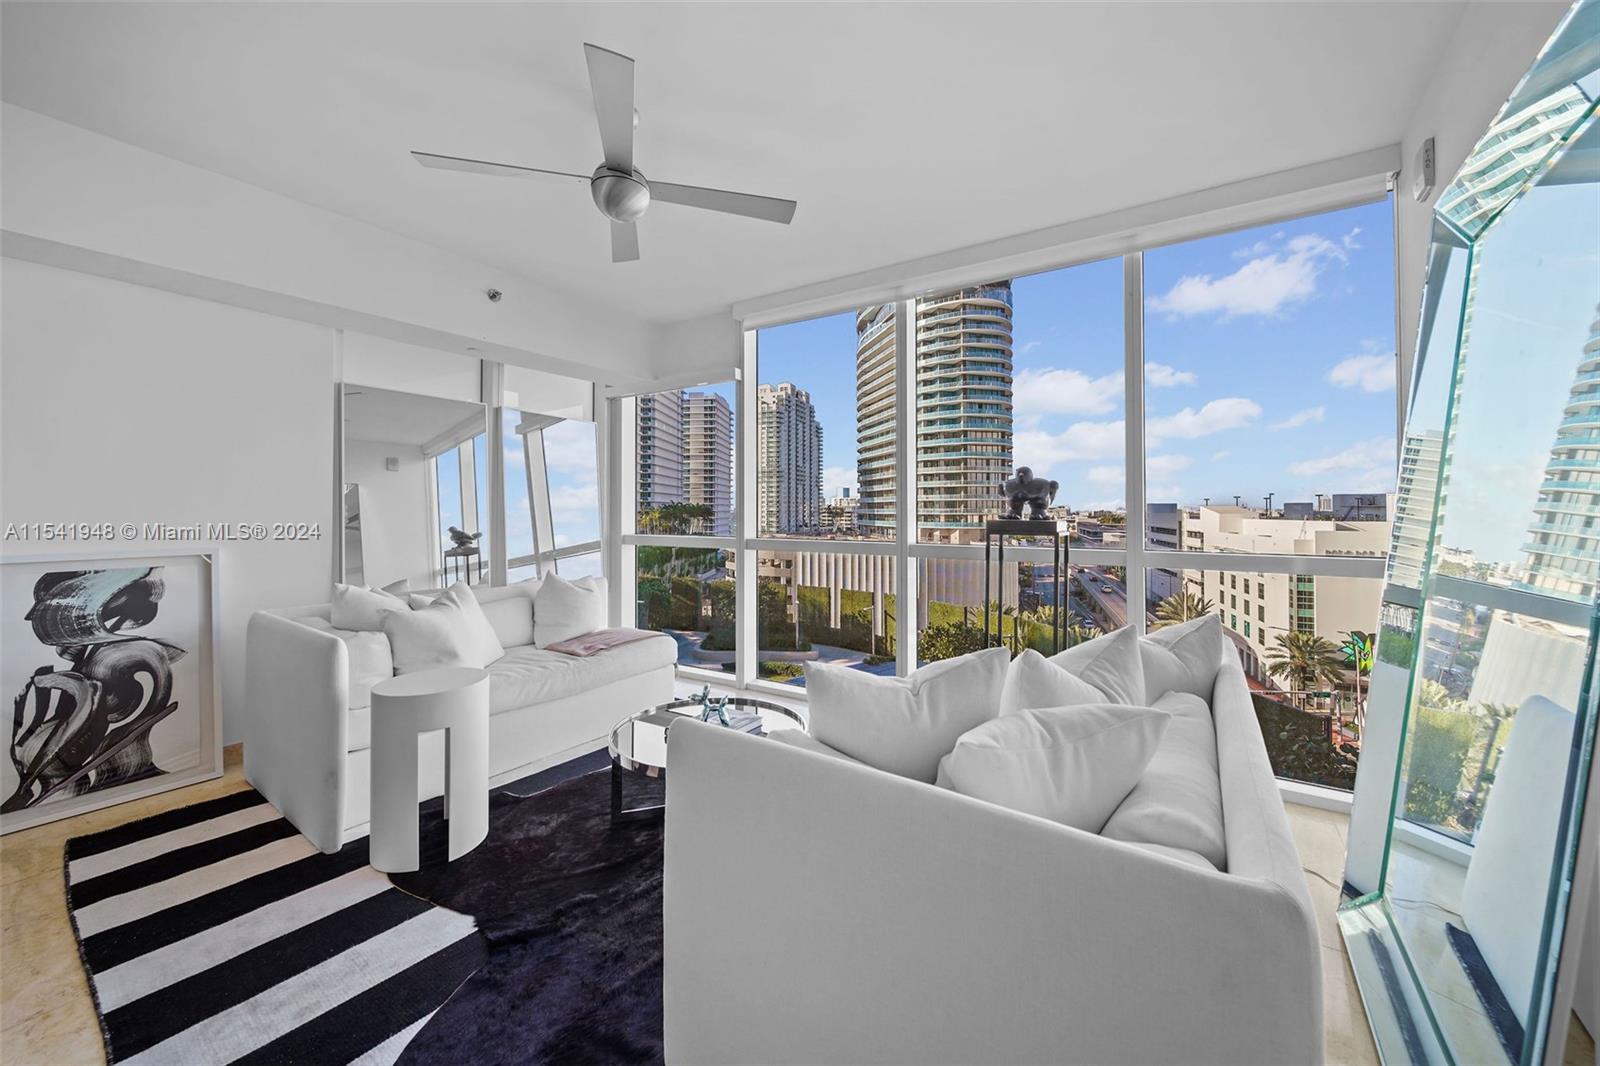 Step into luxury with this bright 1-bed, 1.5-bath residence at the coveted Icon in Miami Beach's popular South of Fifth neighborhood. Revel in natural light streaming through floor-to-ceiling windows. Experience the convenience of in-unit washer/dryer, an assigned parking space, and complimentary valet for guests. Indulge in 5-star amenities, including a pool-floor restaurant, spa/gym, and more. This is an invitation to a lifestyle where every detail reflects sophistication and comfort.